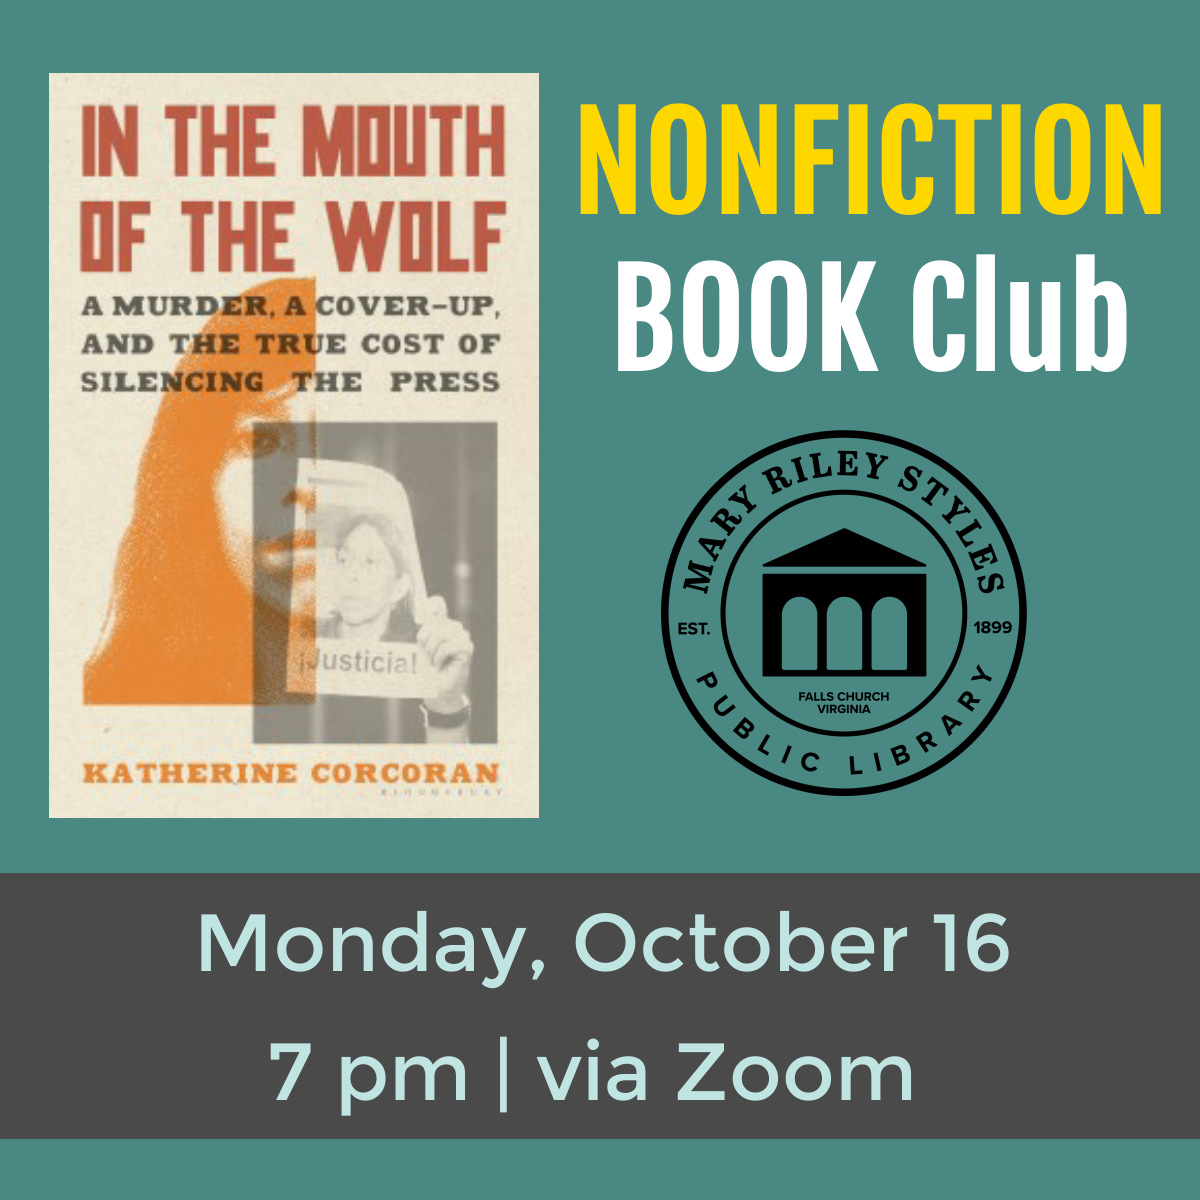 In the Mouth of the Wolf will be discussed in the November meeting.